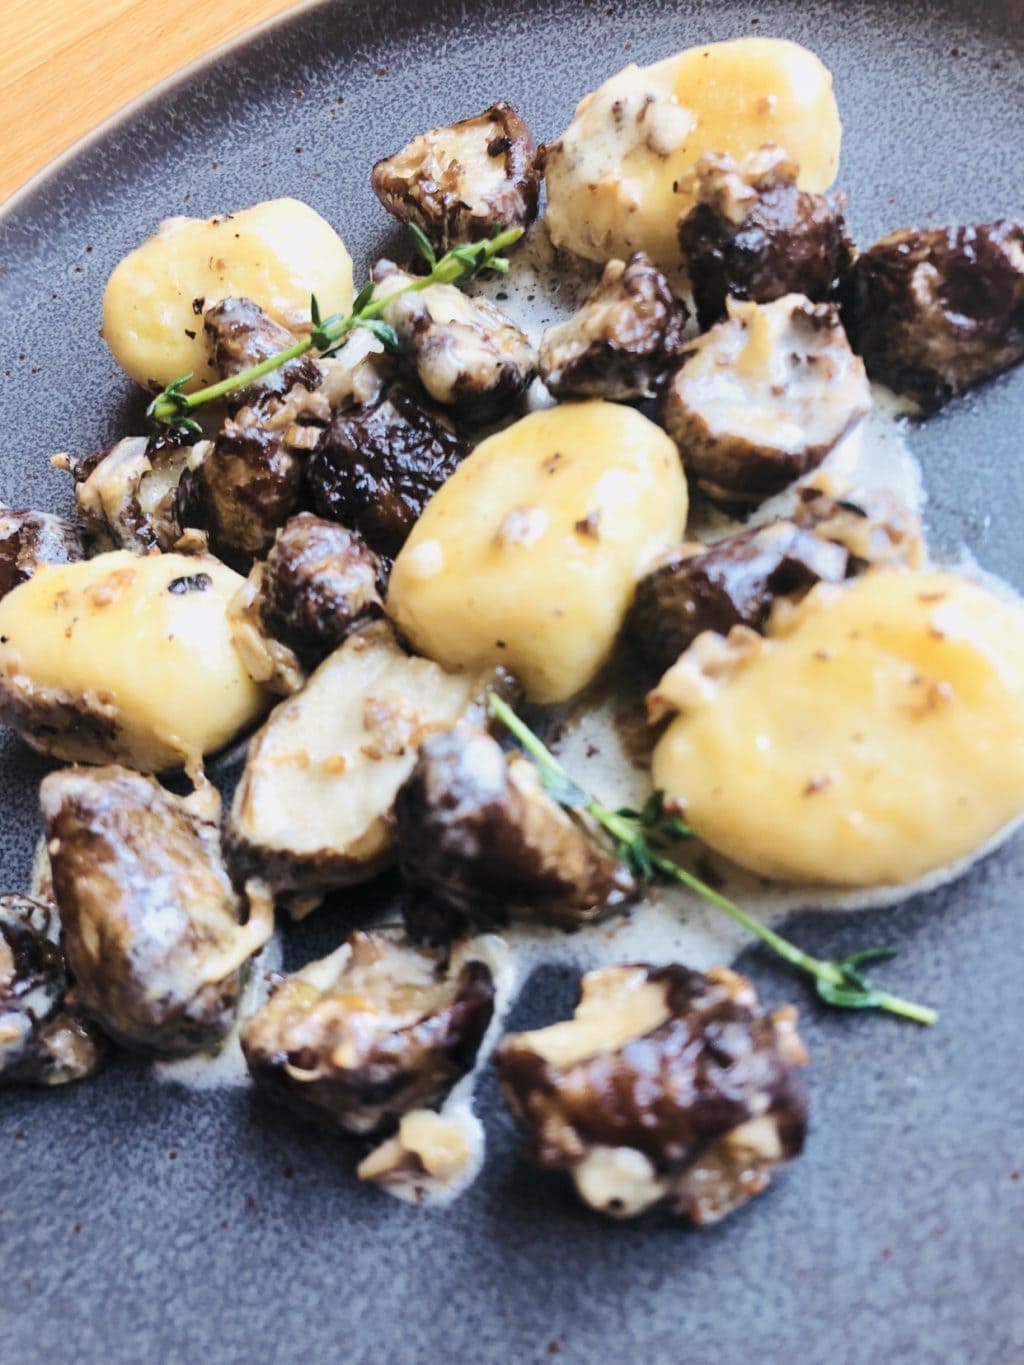 Roasted Sunchokes and Gnocchi in morel cream sauce